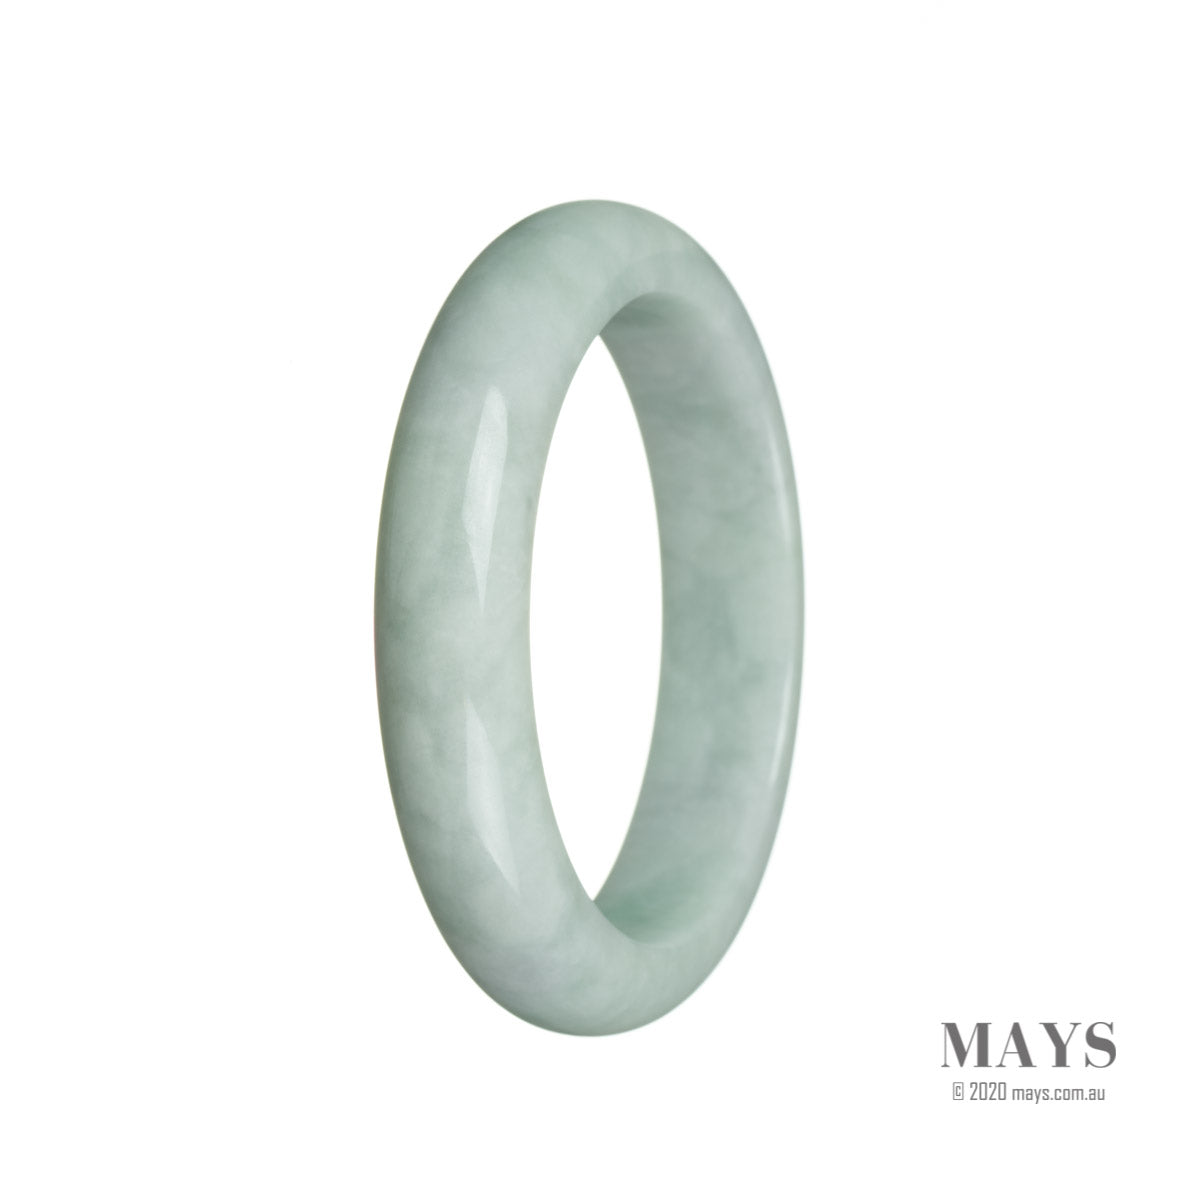 A close-up image of a white traditional jade bracelet with a semi-round shape, measuring 57mm in diameter. The bracelet has a smooth and polished surface, showcasing the natural beauty of the jade.